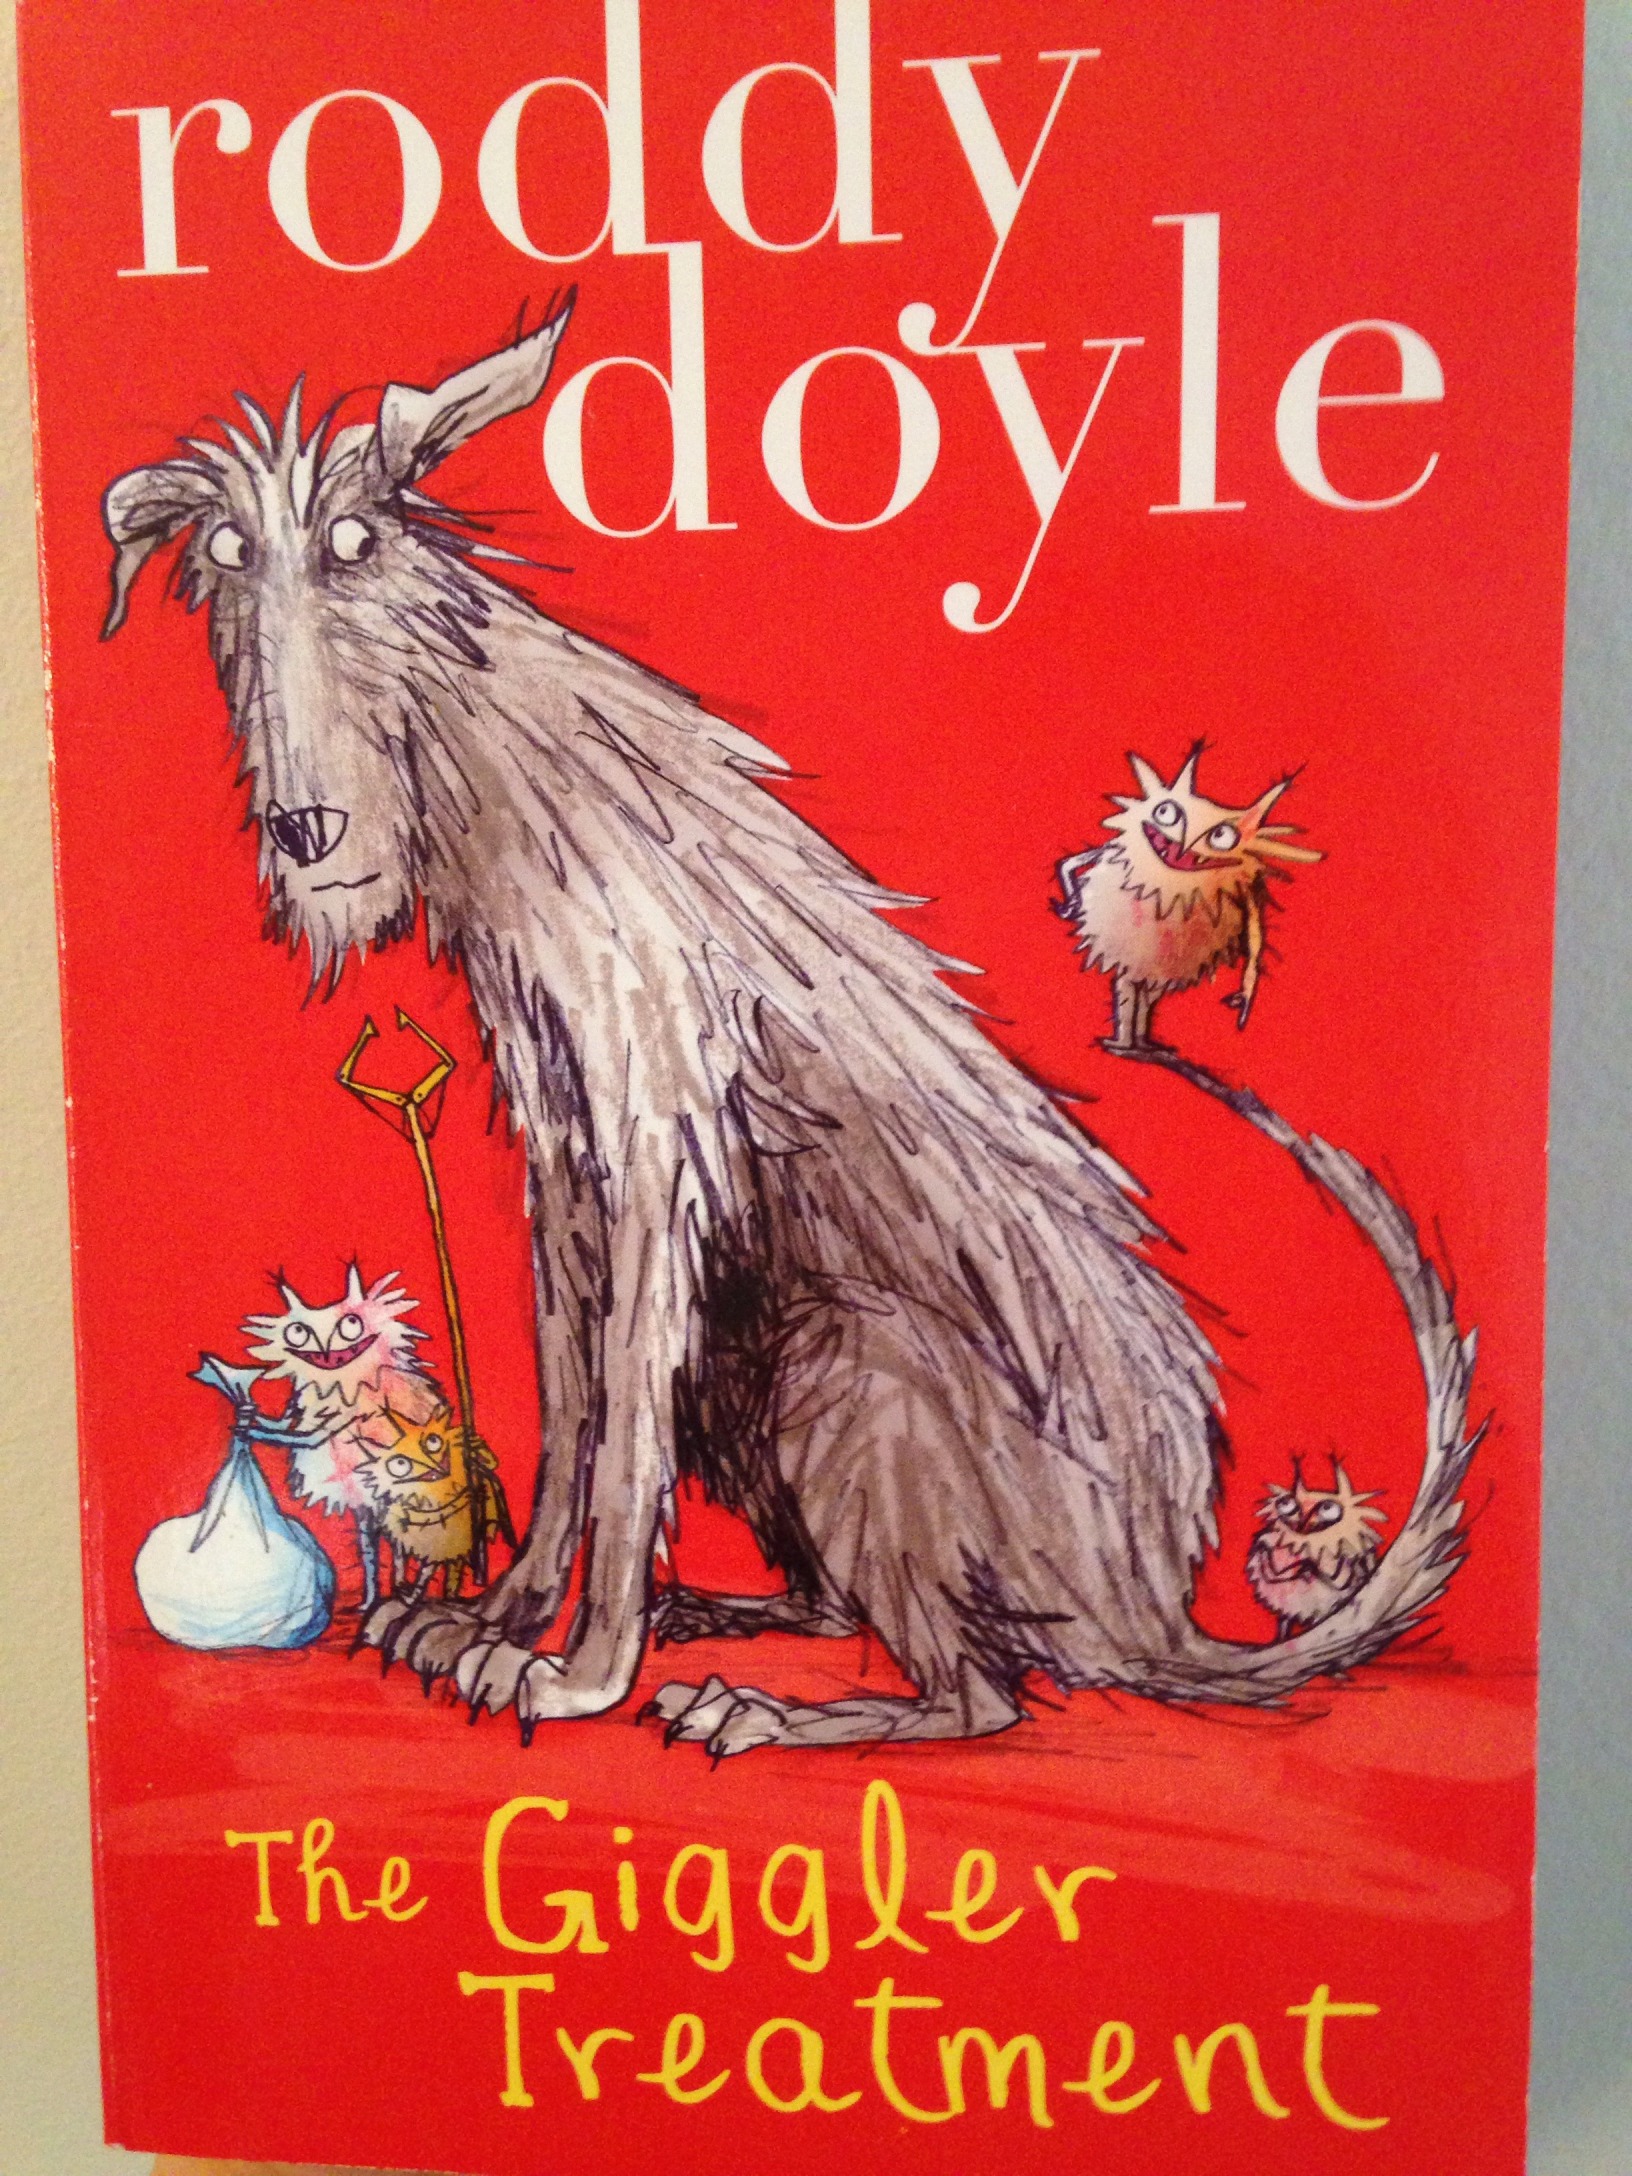 The Giggler Treatment by Roddy Doyle Lucy McGinley